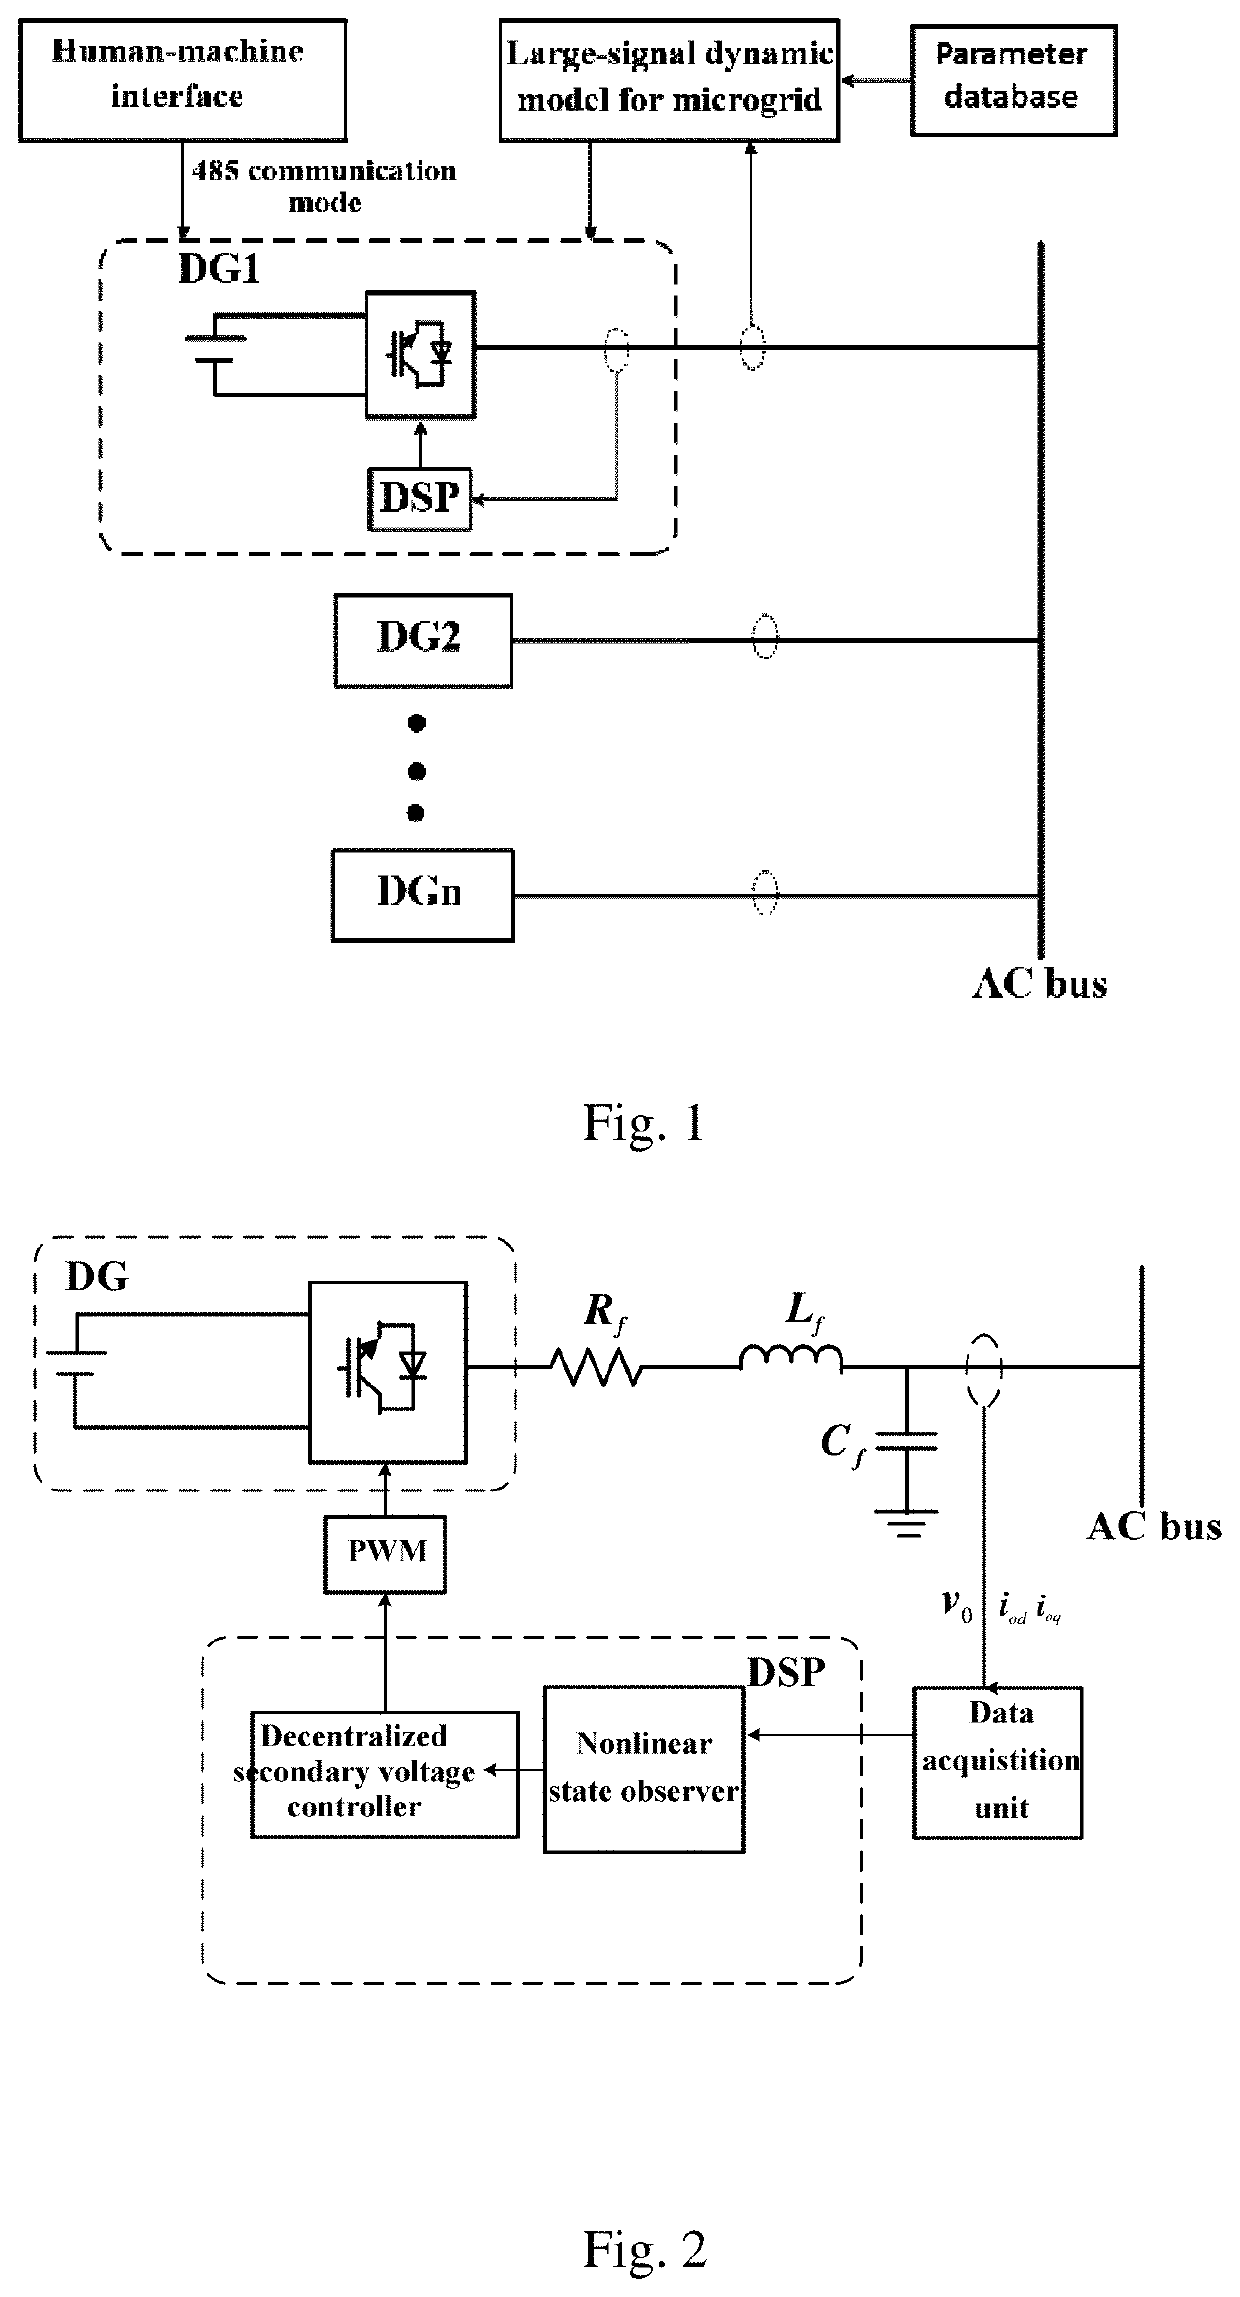 Decentralized voltage control method for microgrid based on nonlinear state observers